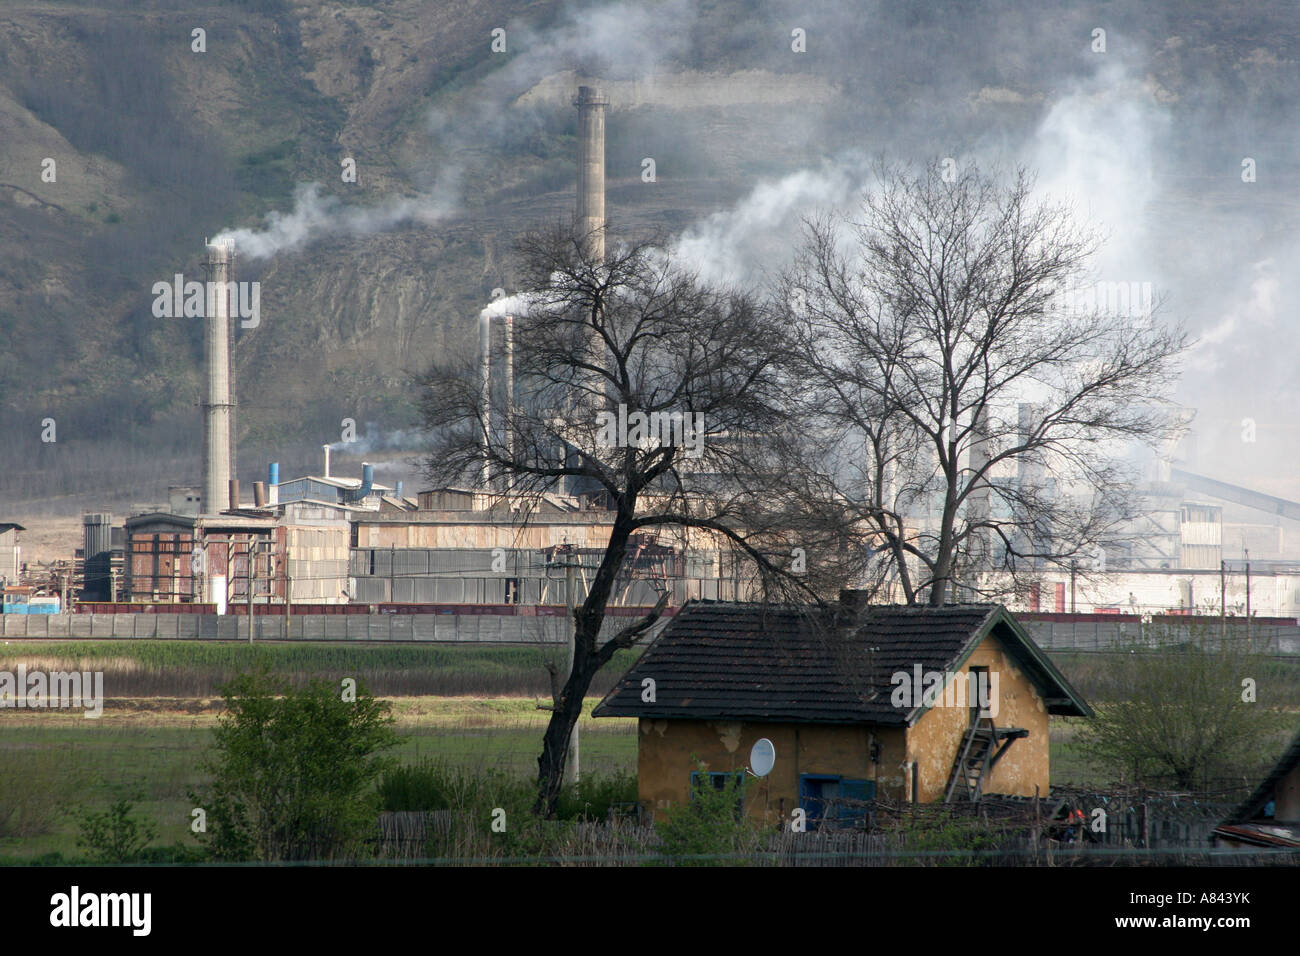 The lead factory Sometra Copsa Mica is the most polluted town in Europe April 2007 Romania Stock Photo